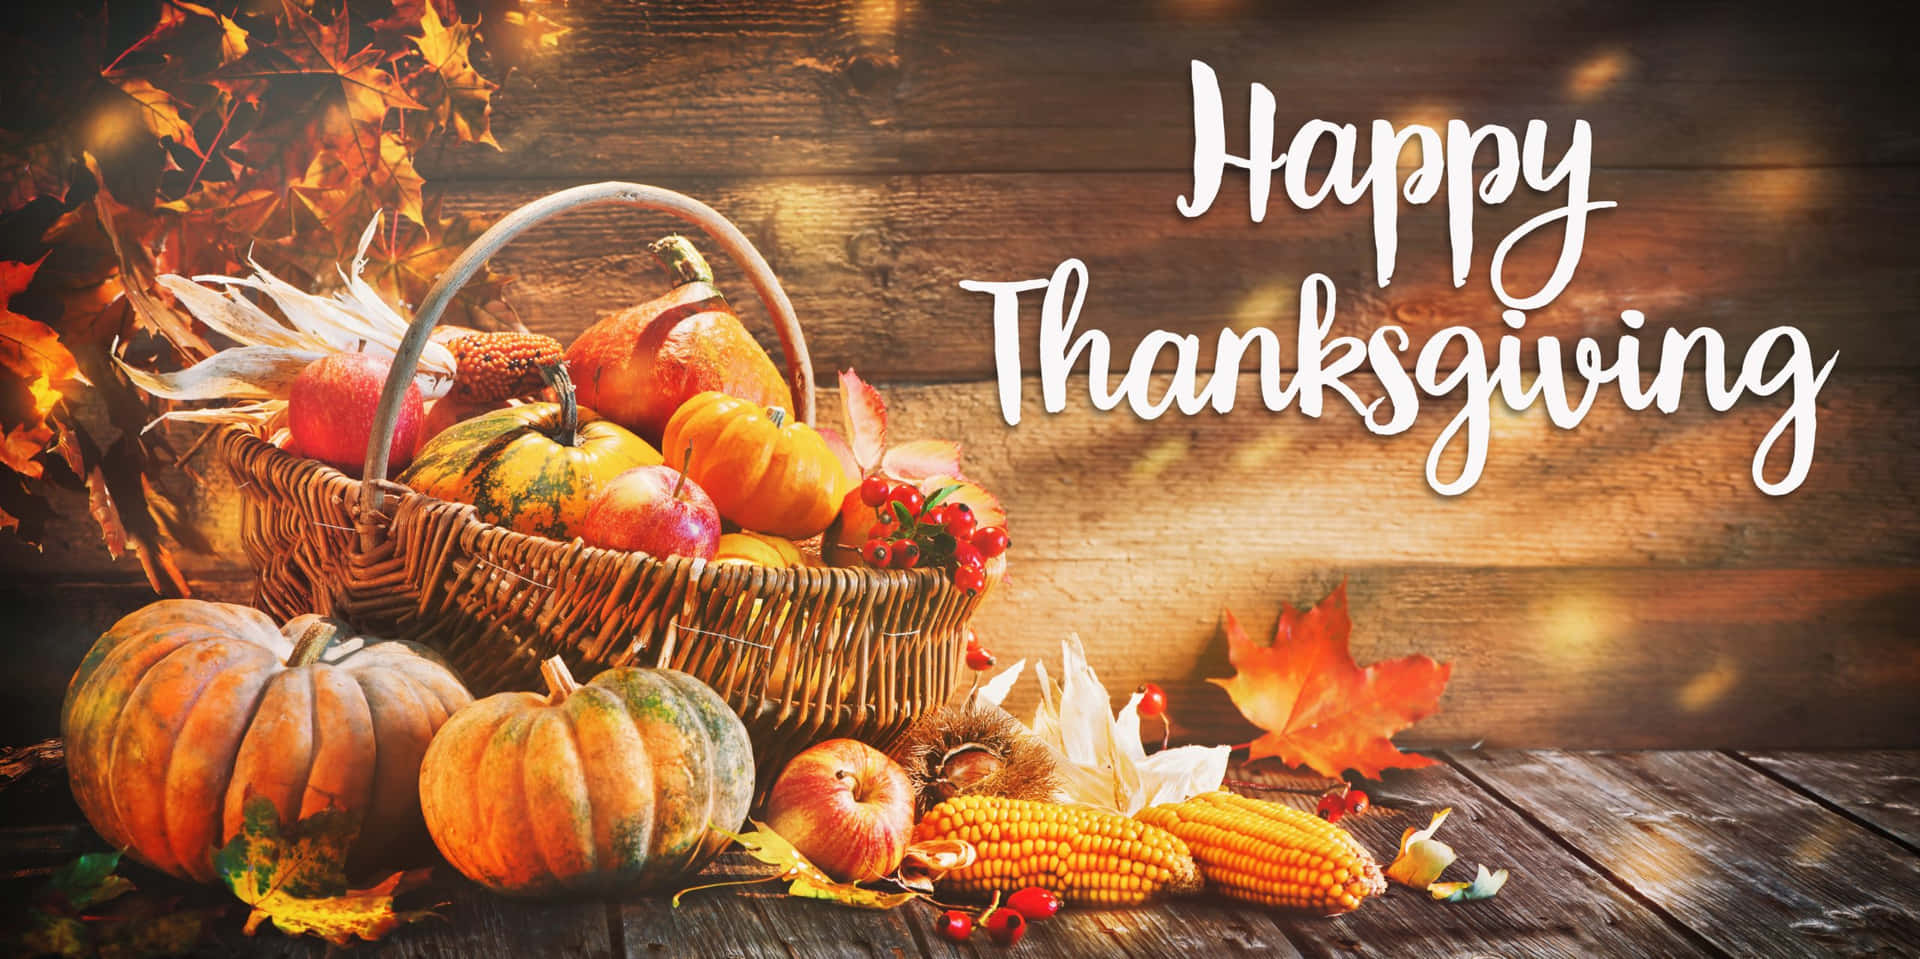 Celebrate The Harvest Season With A Festive Thanksgiving! Wallpaper